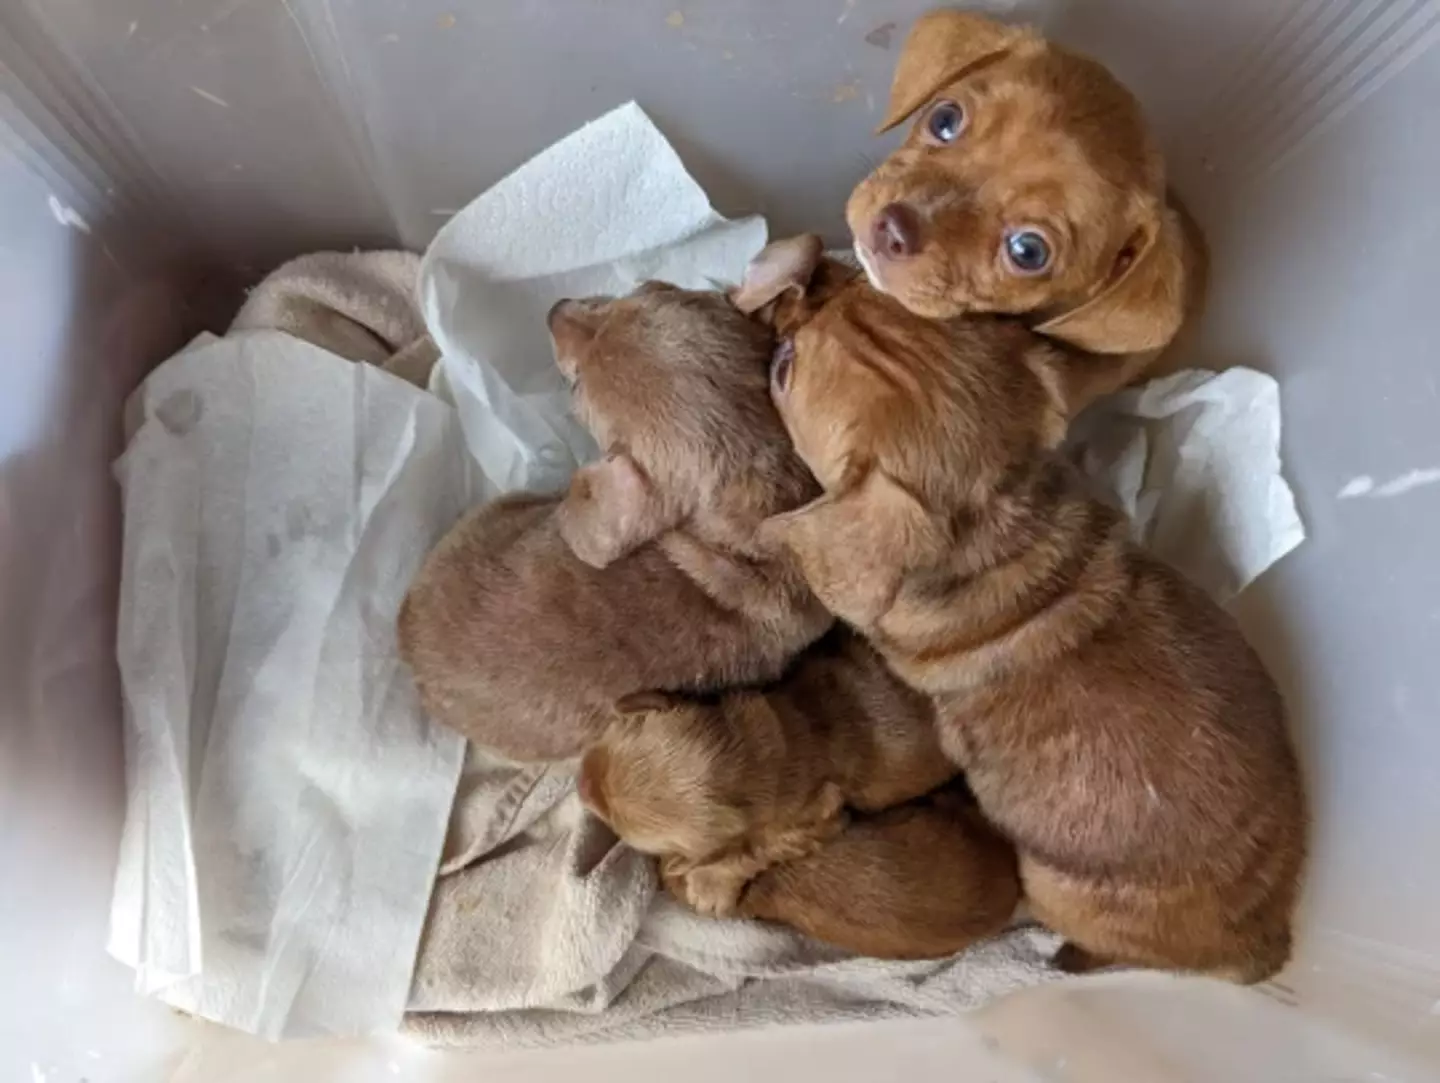 The puppies were found abandoned in south London.